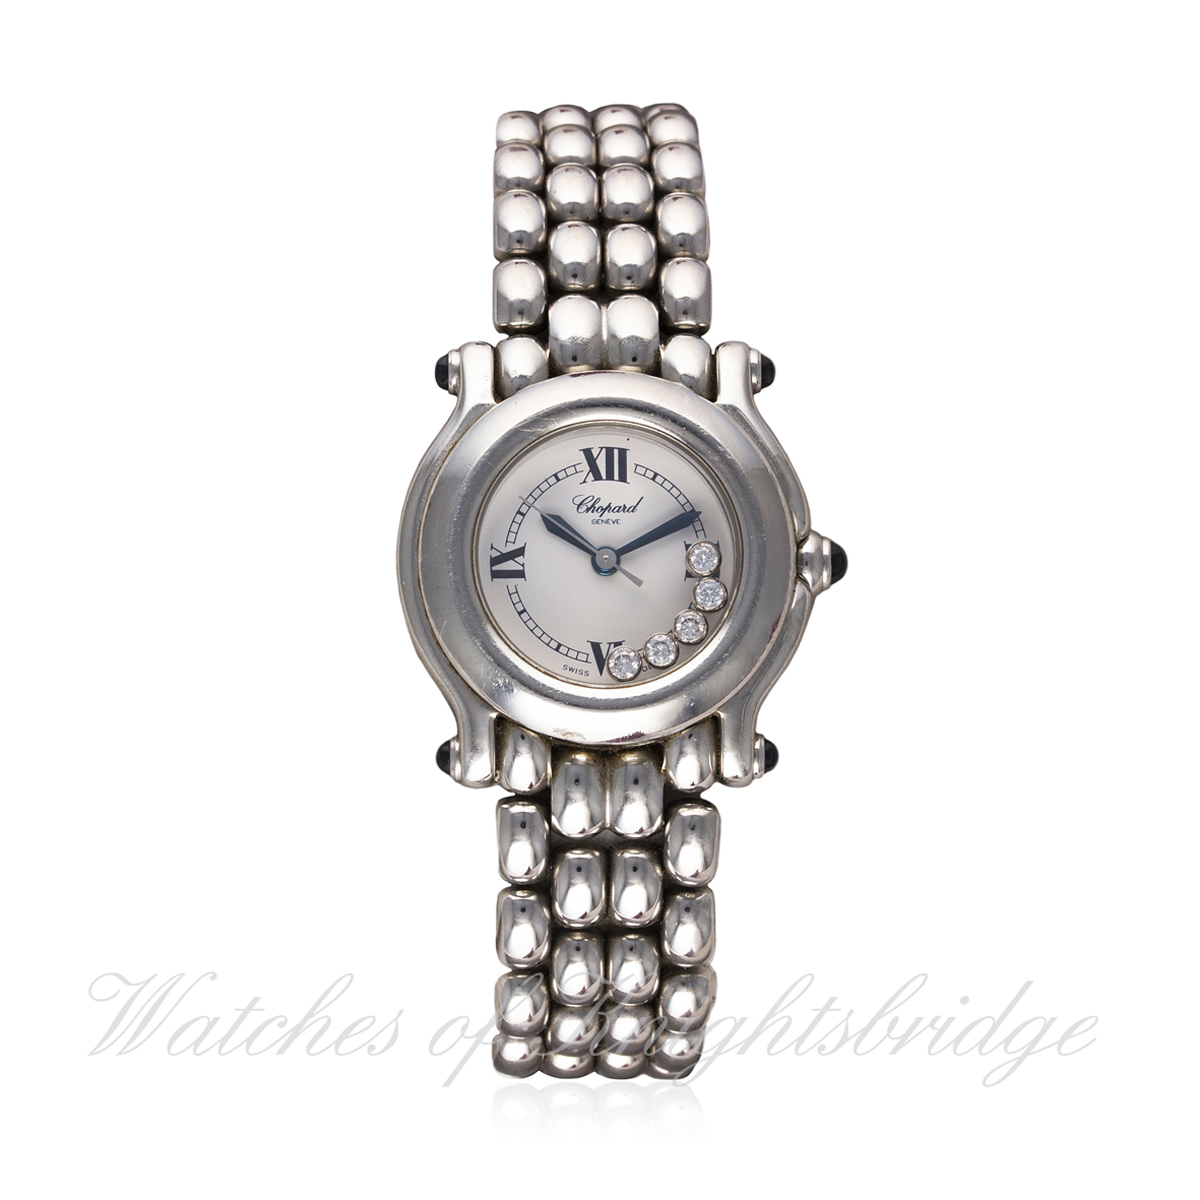 A LADIES STAINLESS STEEL CHOPARD HAPPY SPORT BRACELET WATCH CIRCA 2005, REF. 8245 D: White dial with